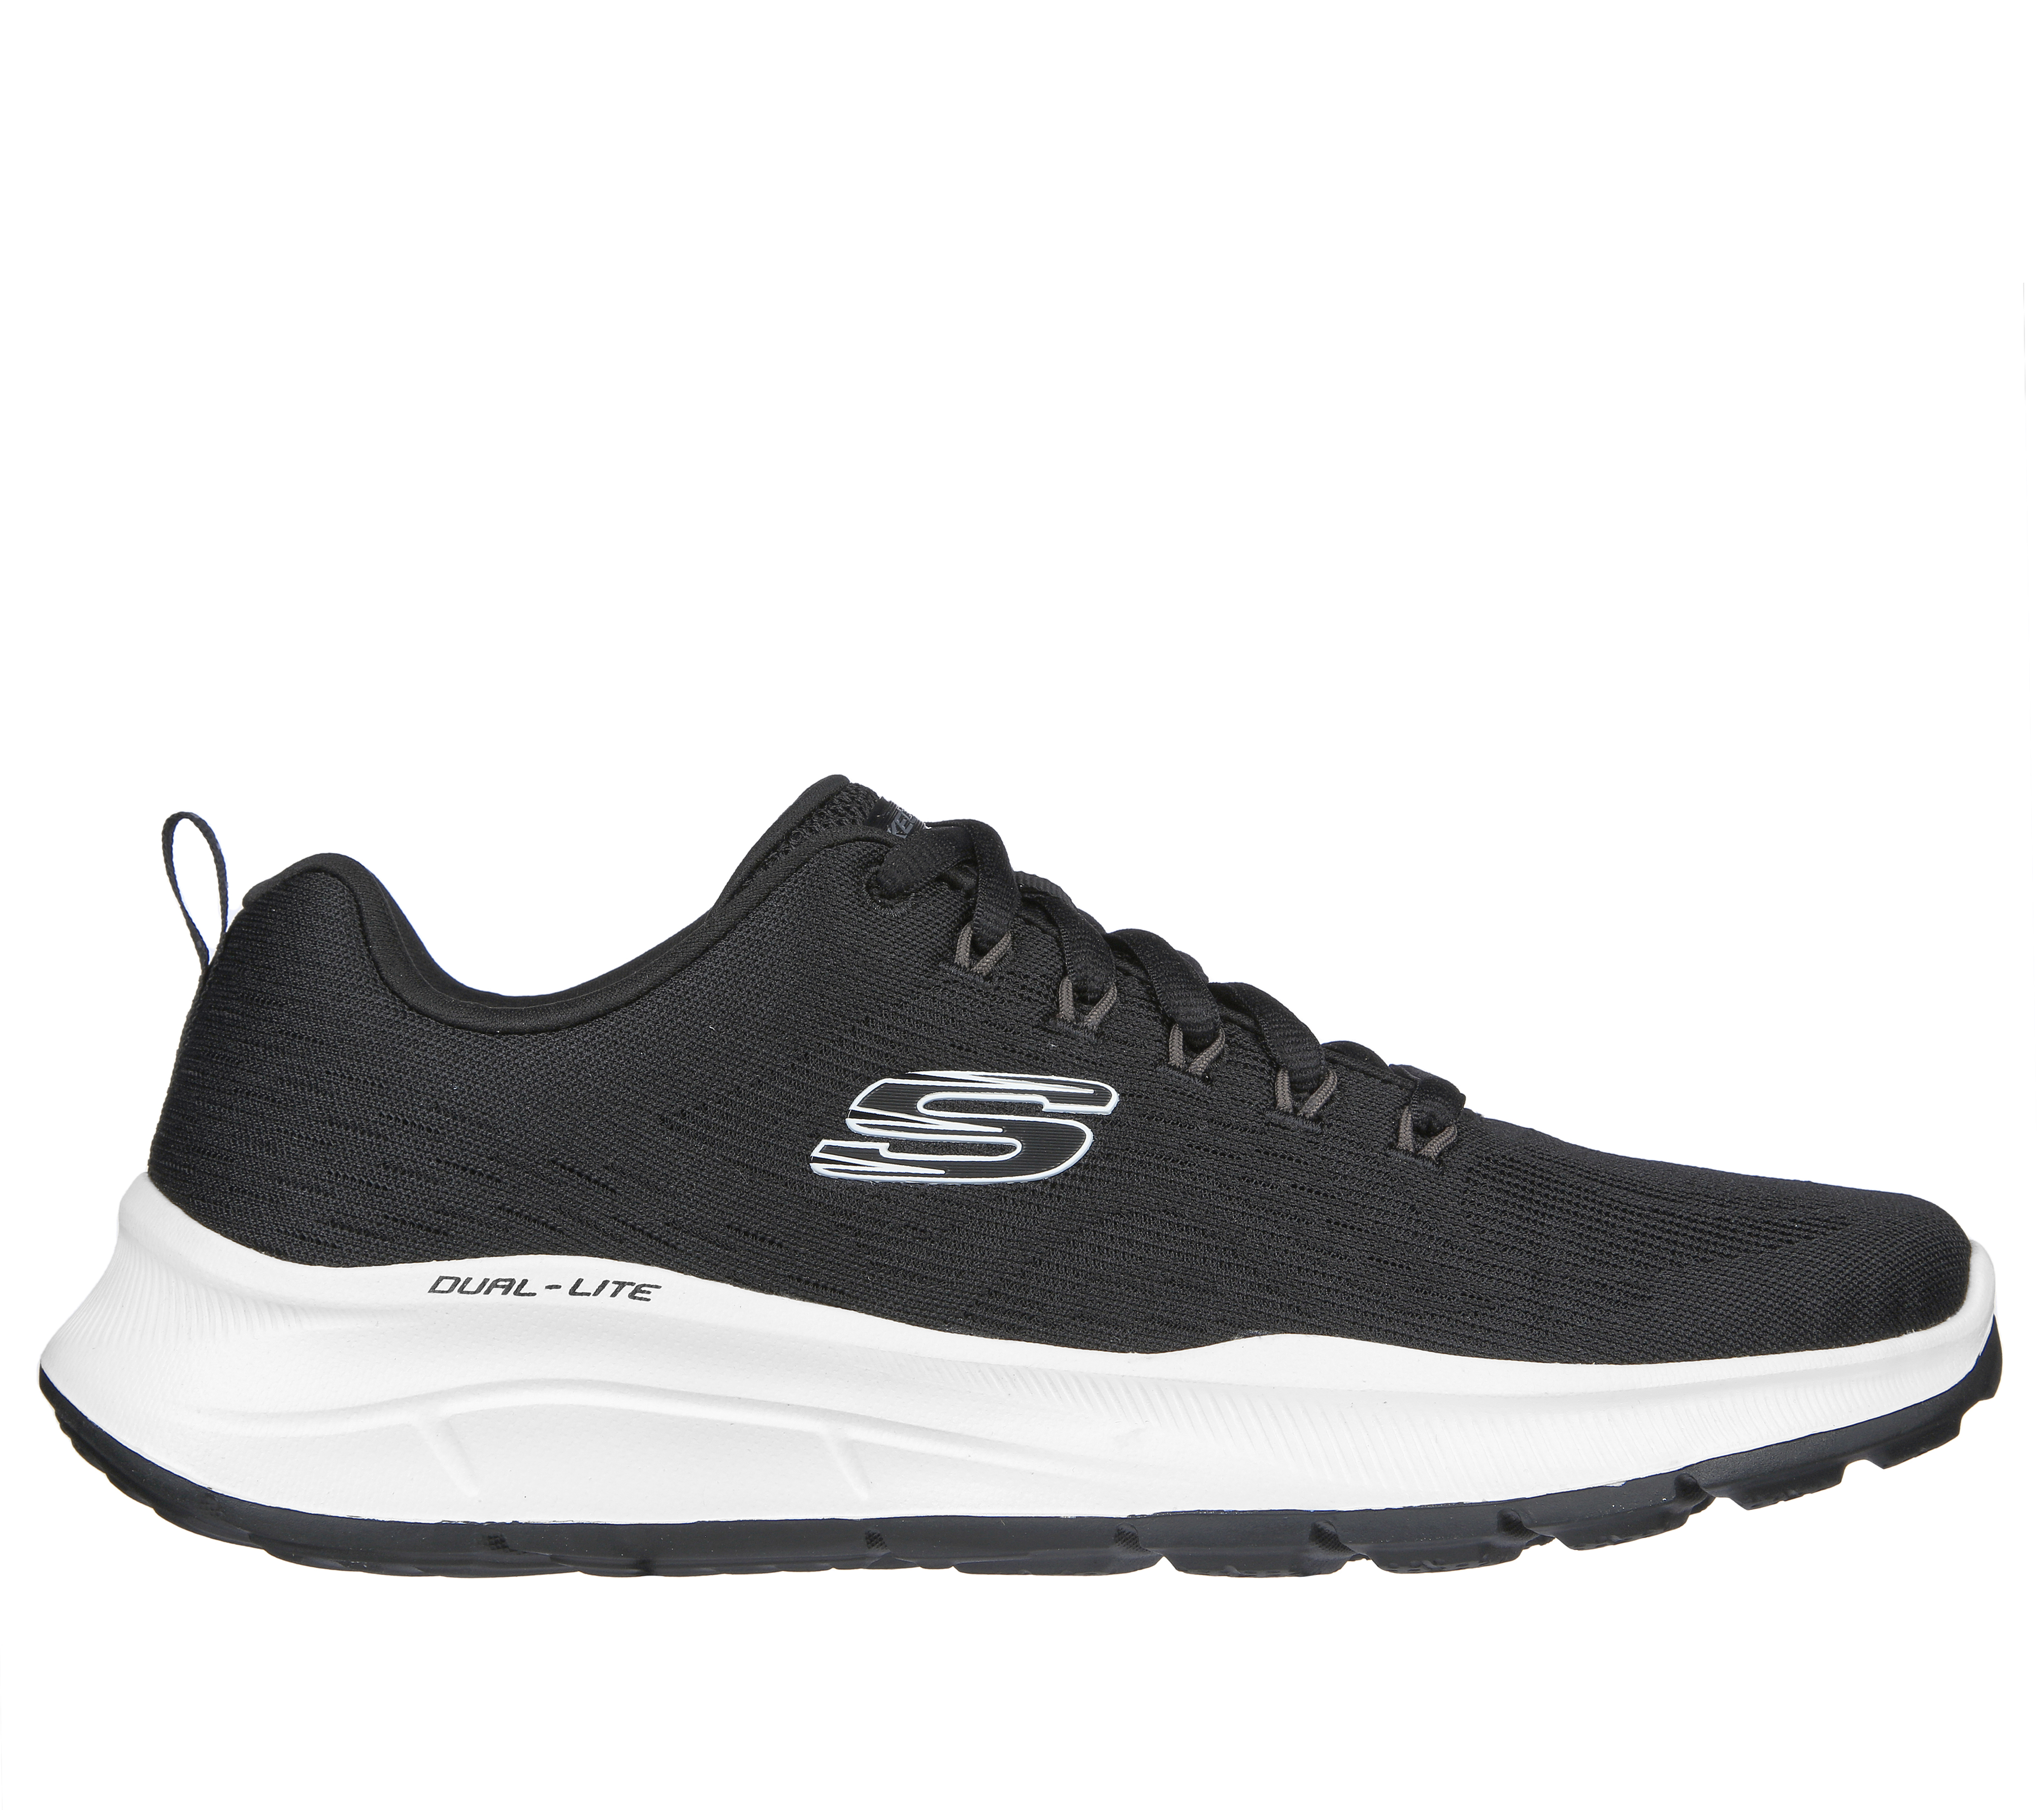 Marchito Deudor Desafío Relaxed Fit: Equalizer 5.0 | SKECHERS CZ